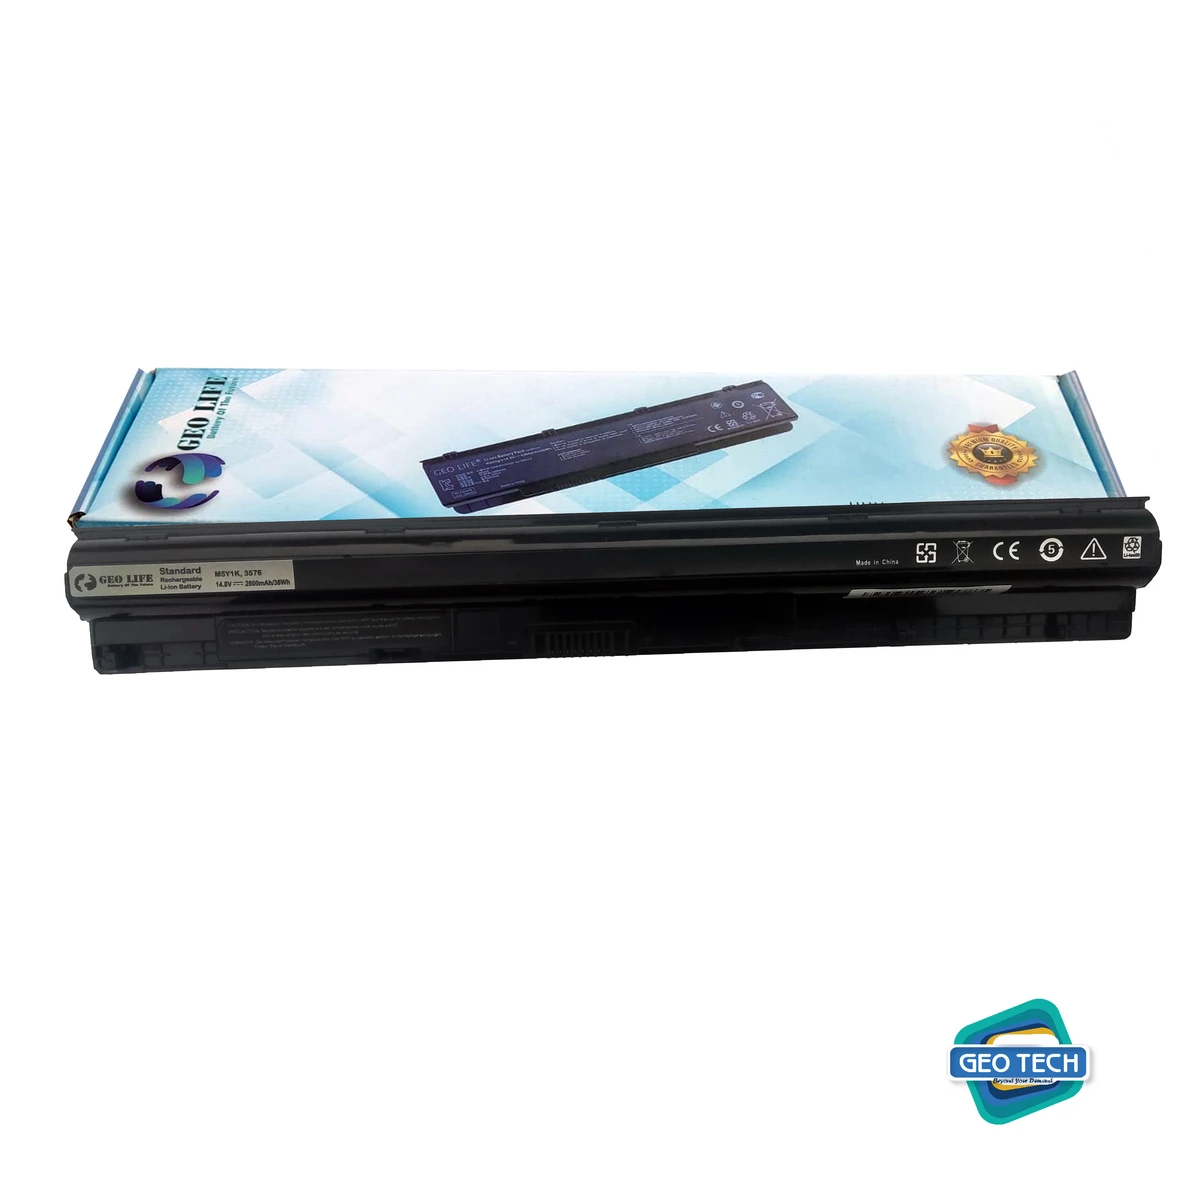 Laptop Battery Compatible with Dell Inspiron 3451 40Wh 14.8V,14 15 17 3000 5000 Series,5558 5559 3551 453-BBBR 3452 3458N 3567 5755 5758 5759,Vostro 3458 3558,6YFVW VN3N0 GXVJ3 W6D4J HD4J0 4WY7C